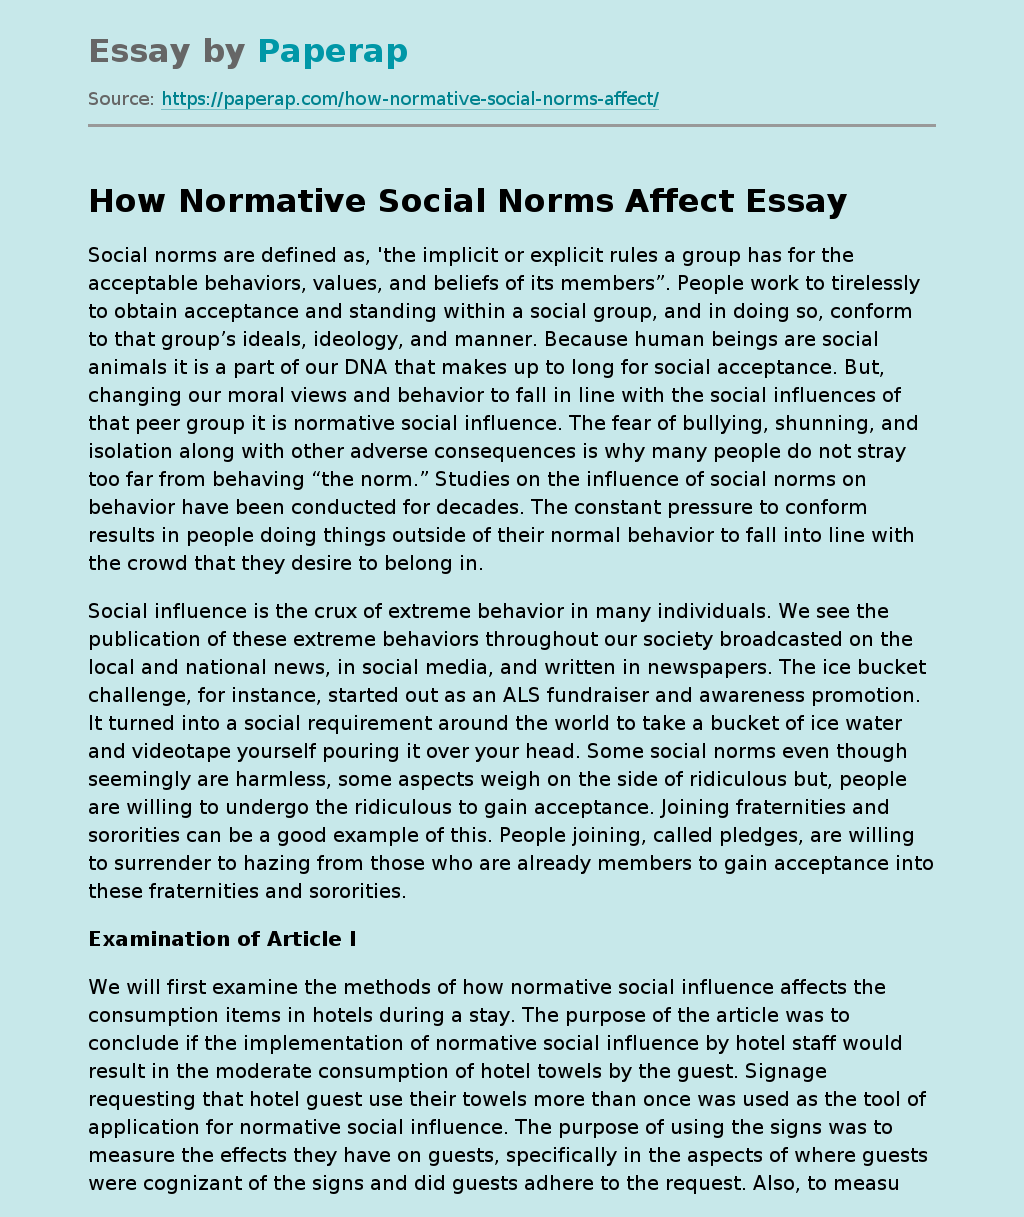 How Normative Social Norms Affect